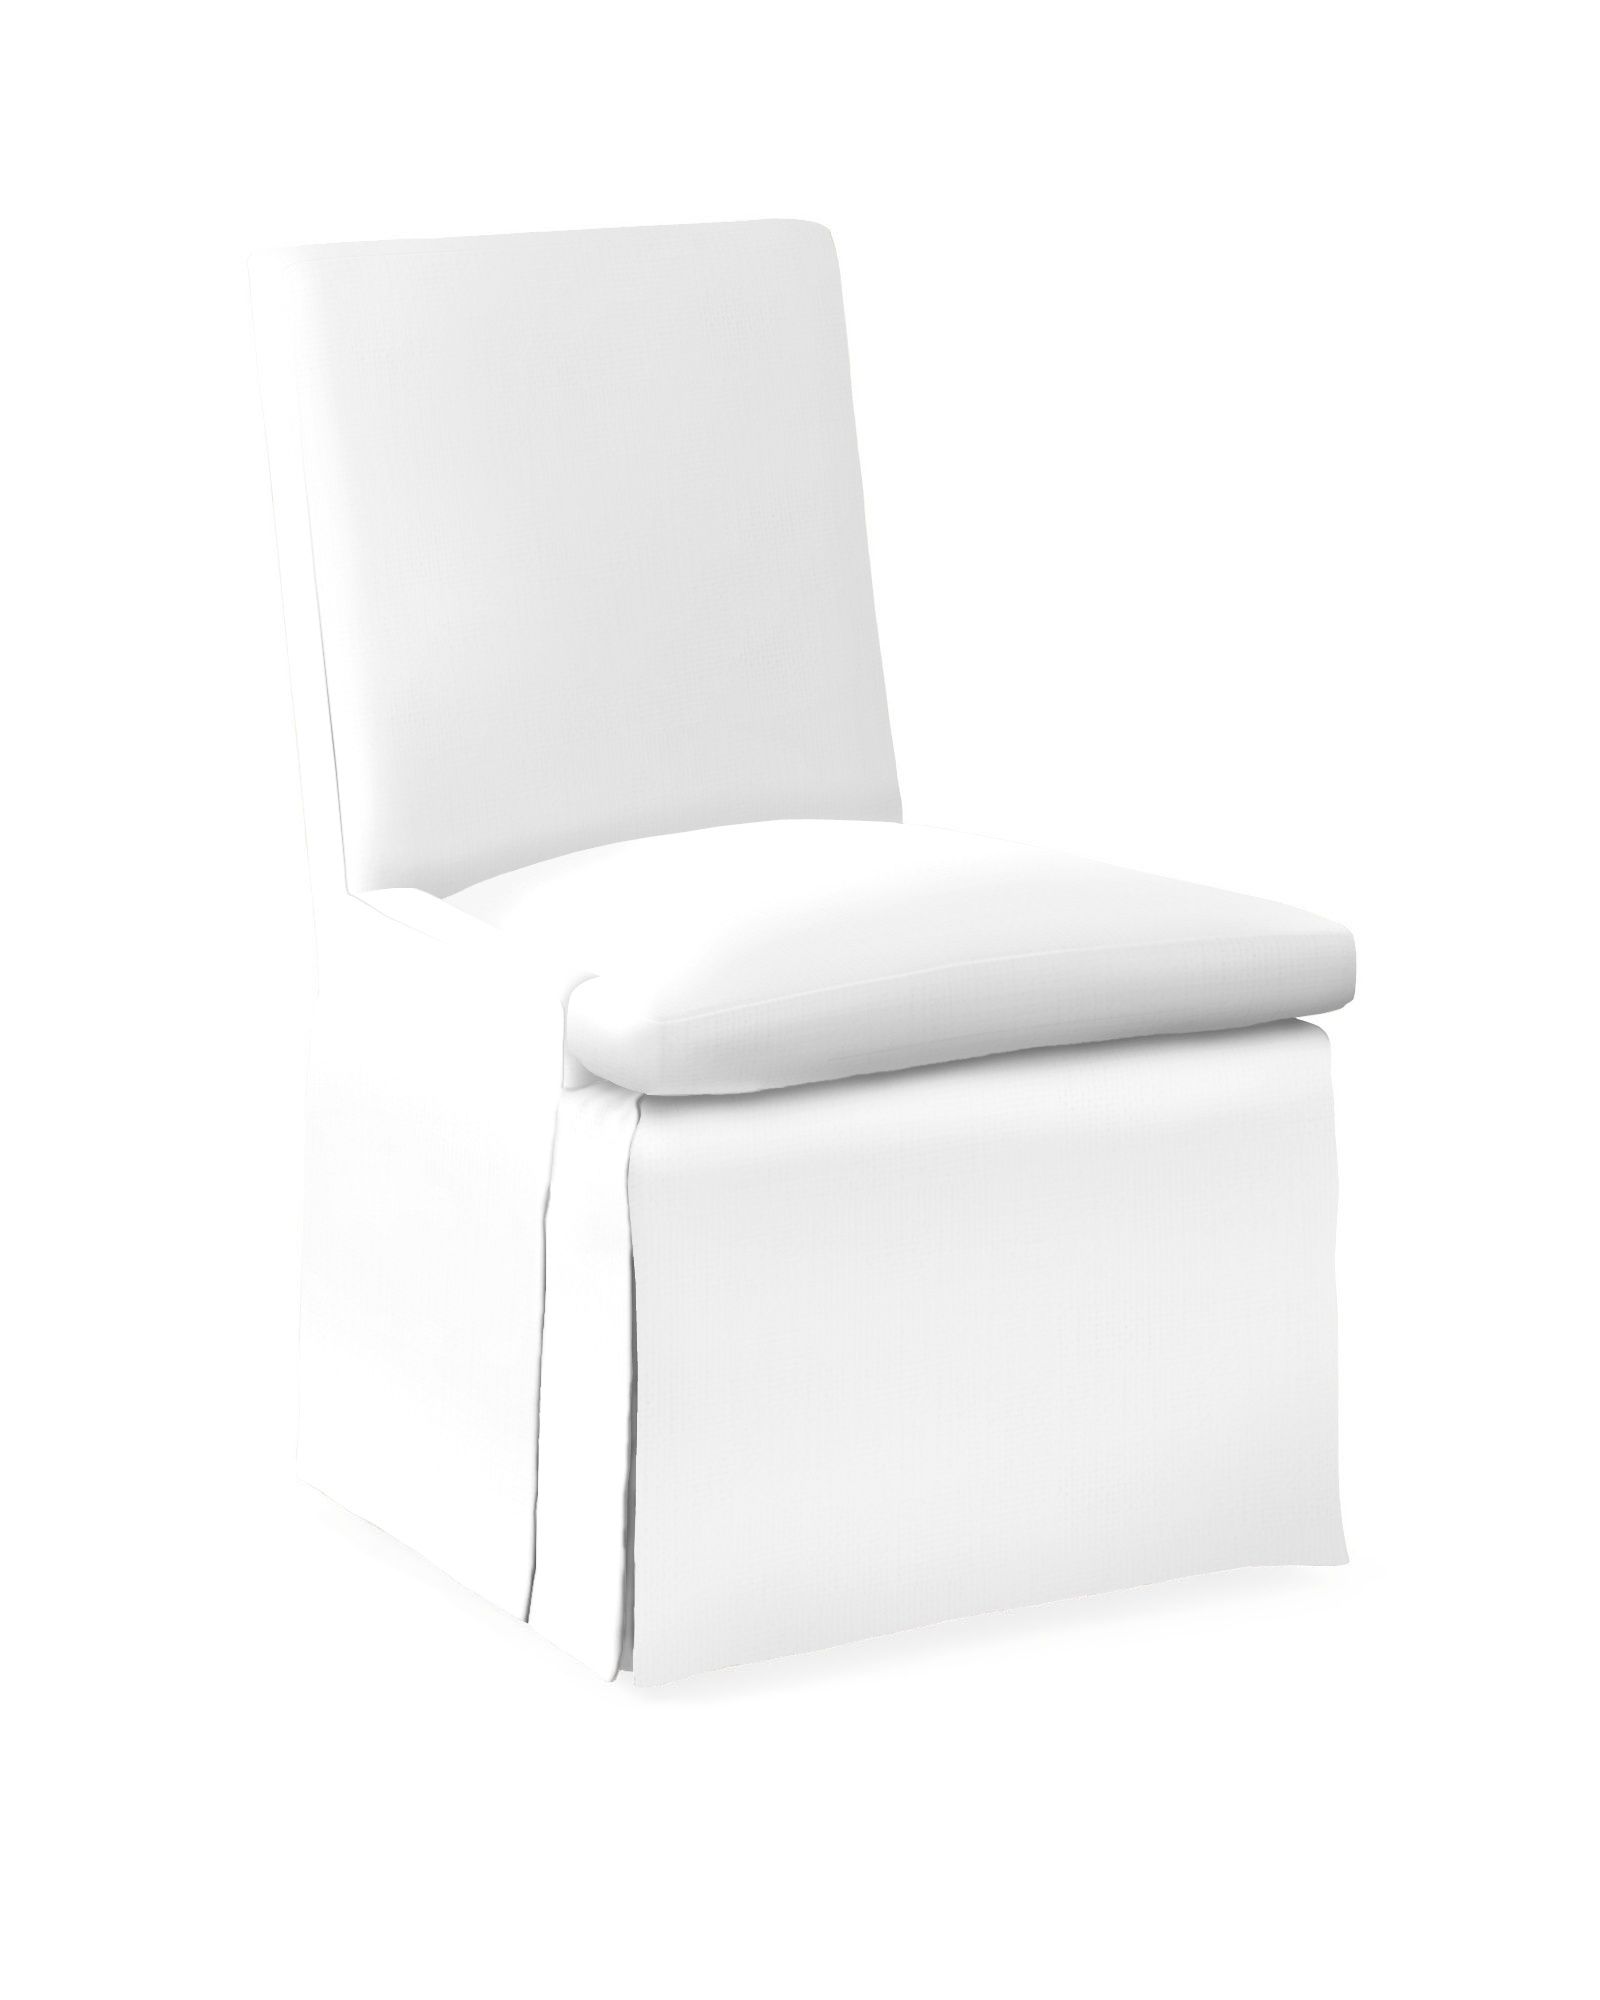 Belvedere Dining Chair | Serena and Lily